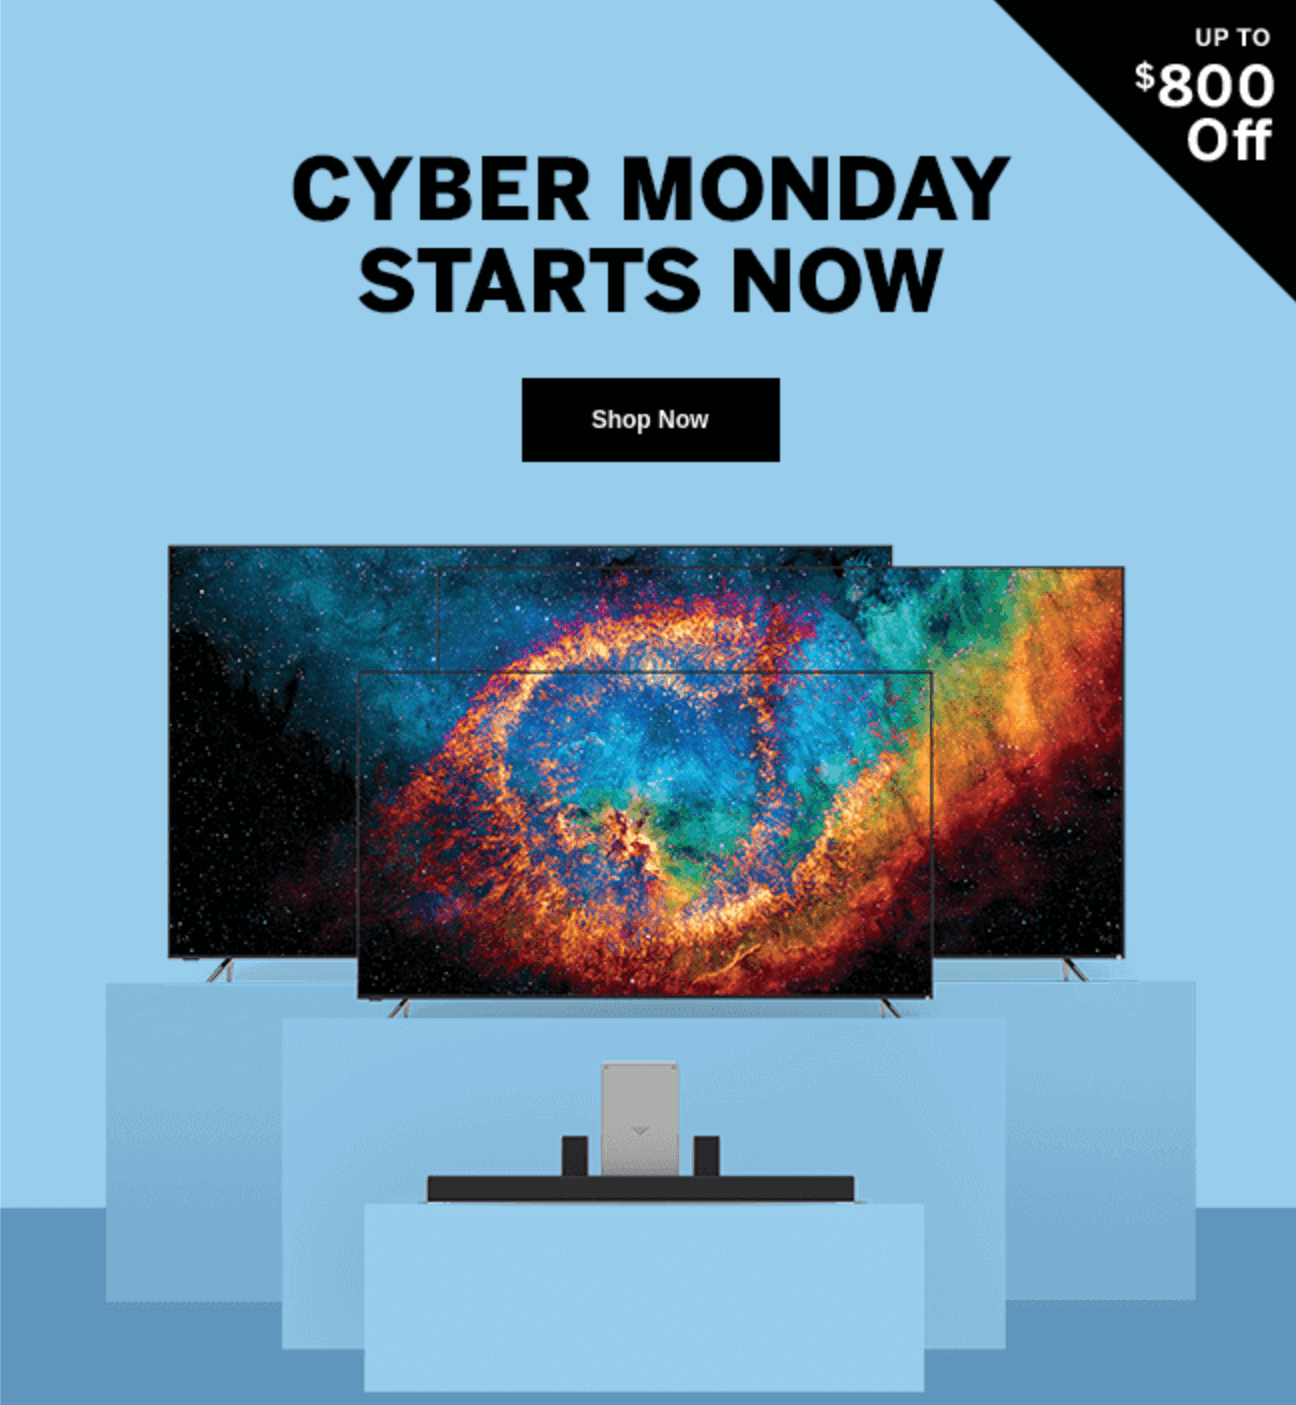 Appealing Banner for Cyber Monday Offer